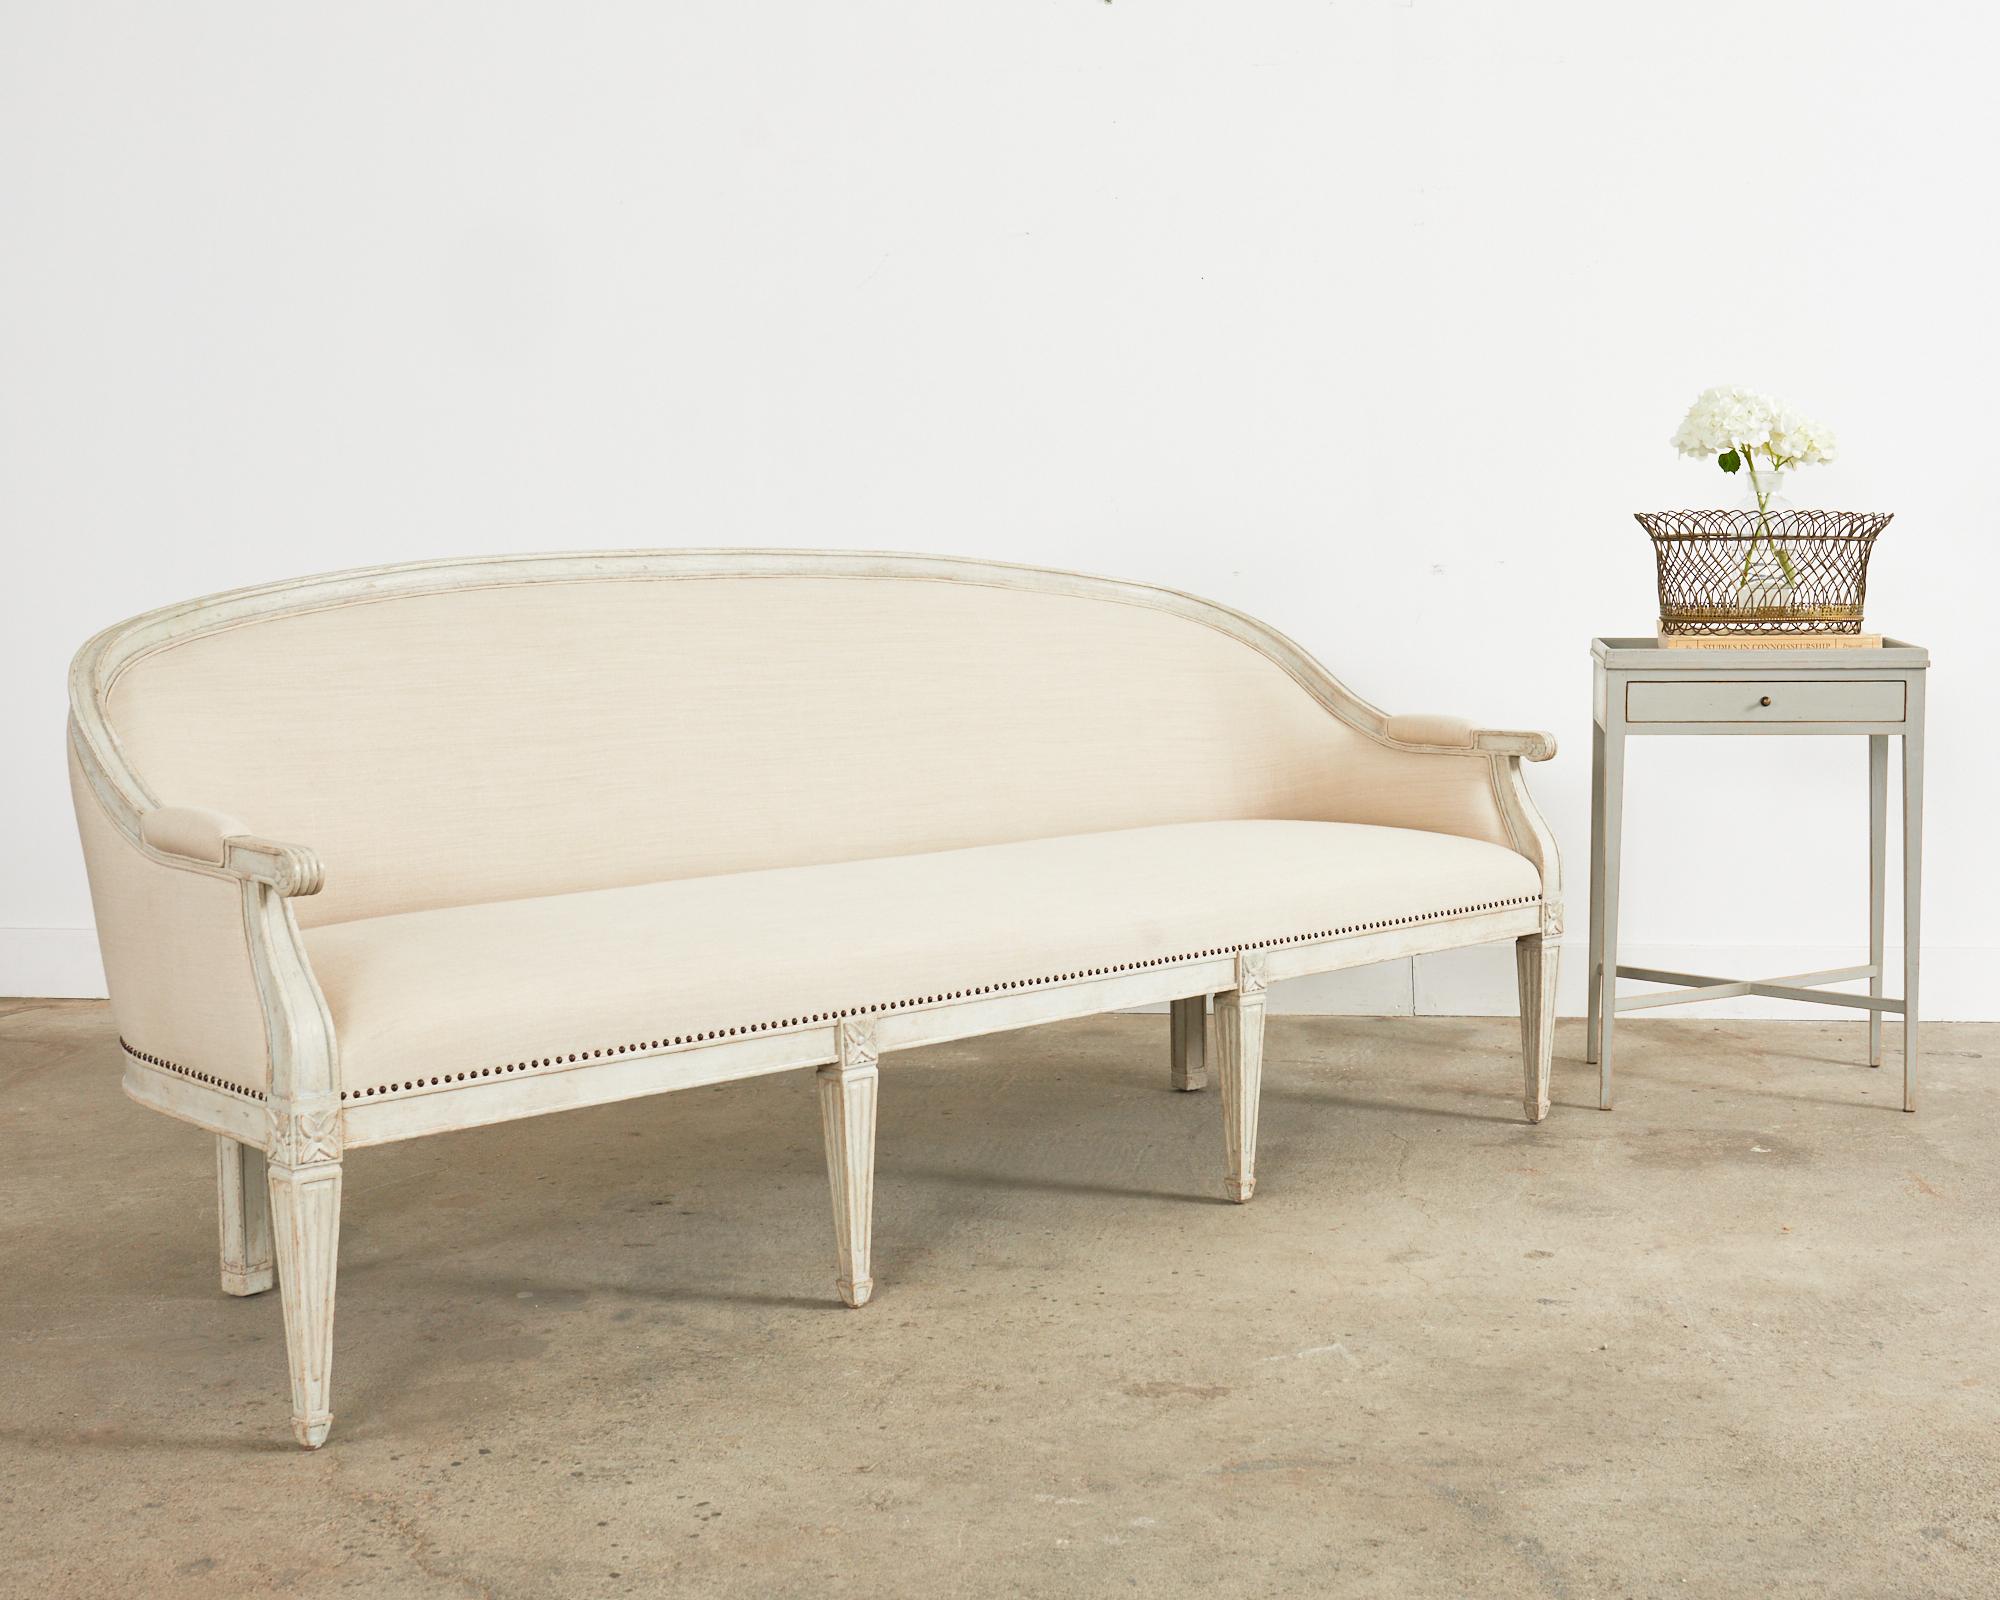 Sublime bespoke cabriole sofa, settee, or canapé made in the neoclassical Swedish Gustavian style. The sofa feature a gracefully curved cabriole style hardwood frame with an intentionally aged, distressed lacquer painted finish. Upholstered with a